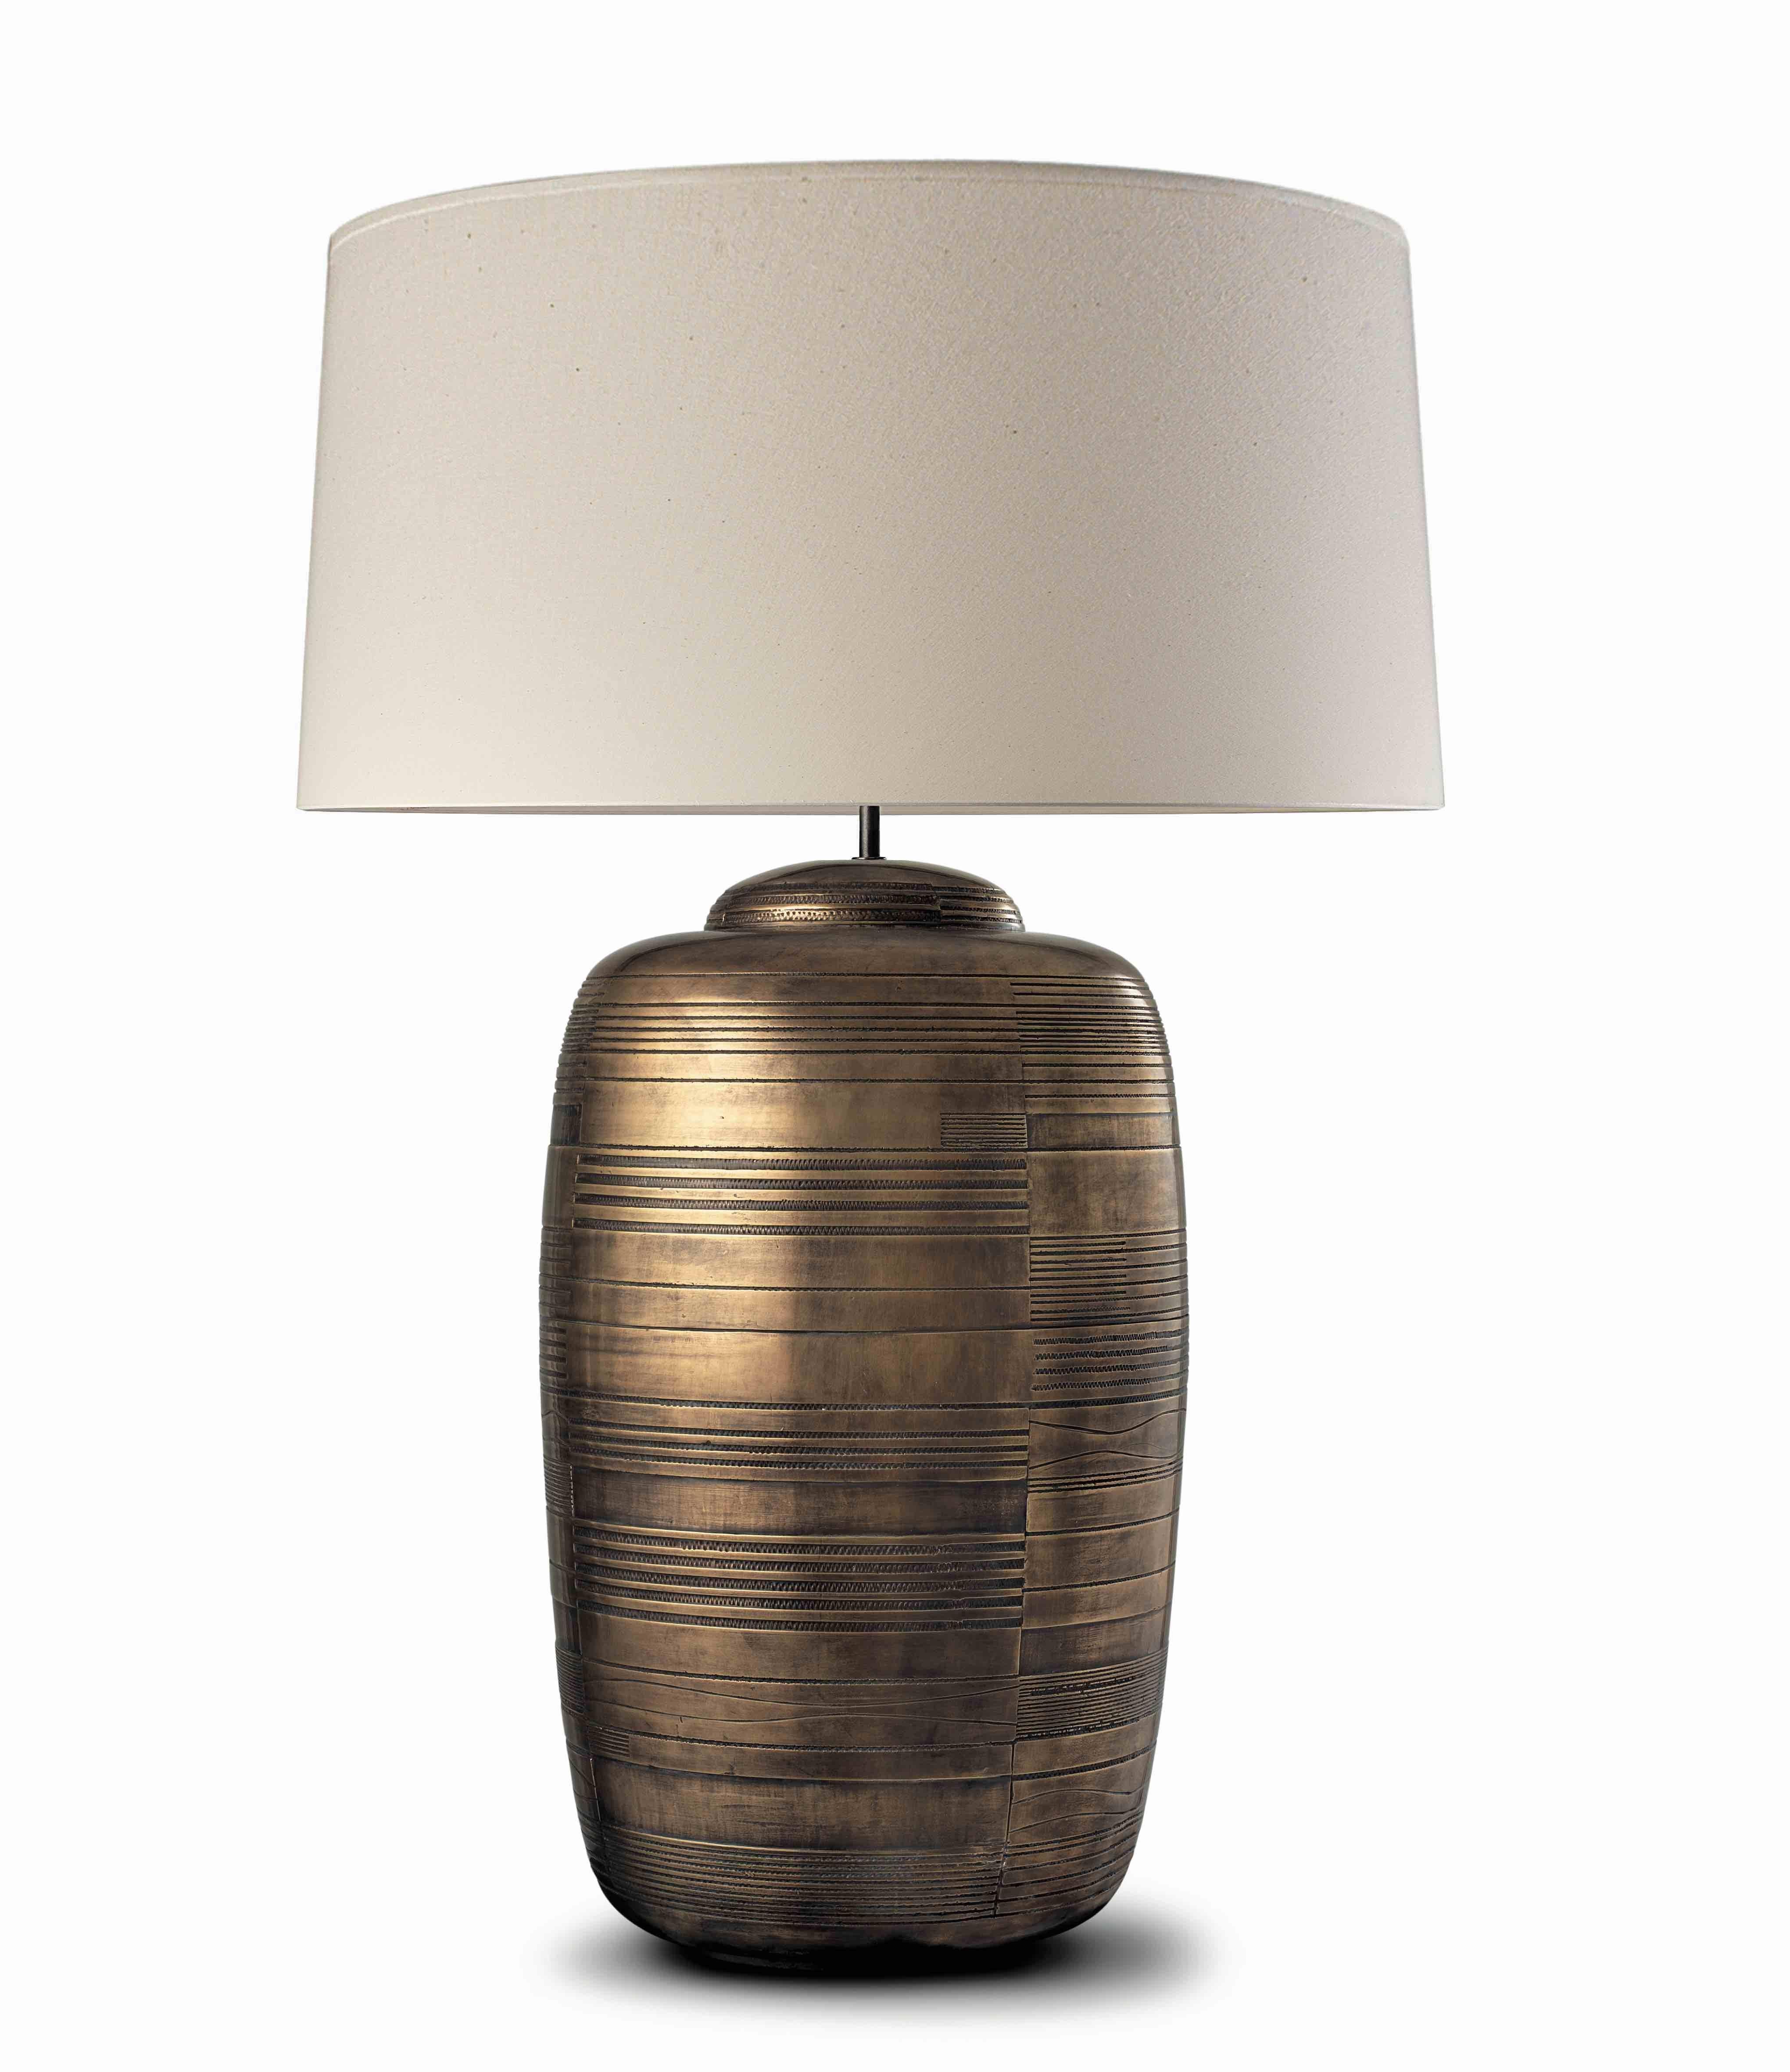 Contemporary Art Deco design handmade and hand-finished table lamp. We combine skilled craftsmanship with the finest materials to give shape to our designs. Its artisan finish makes each piece different from the other and easy to customize. Each